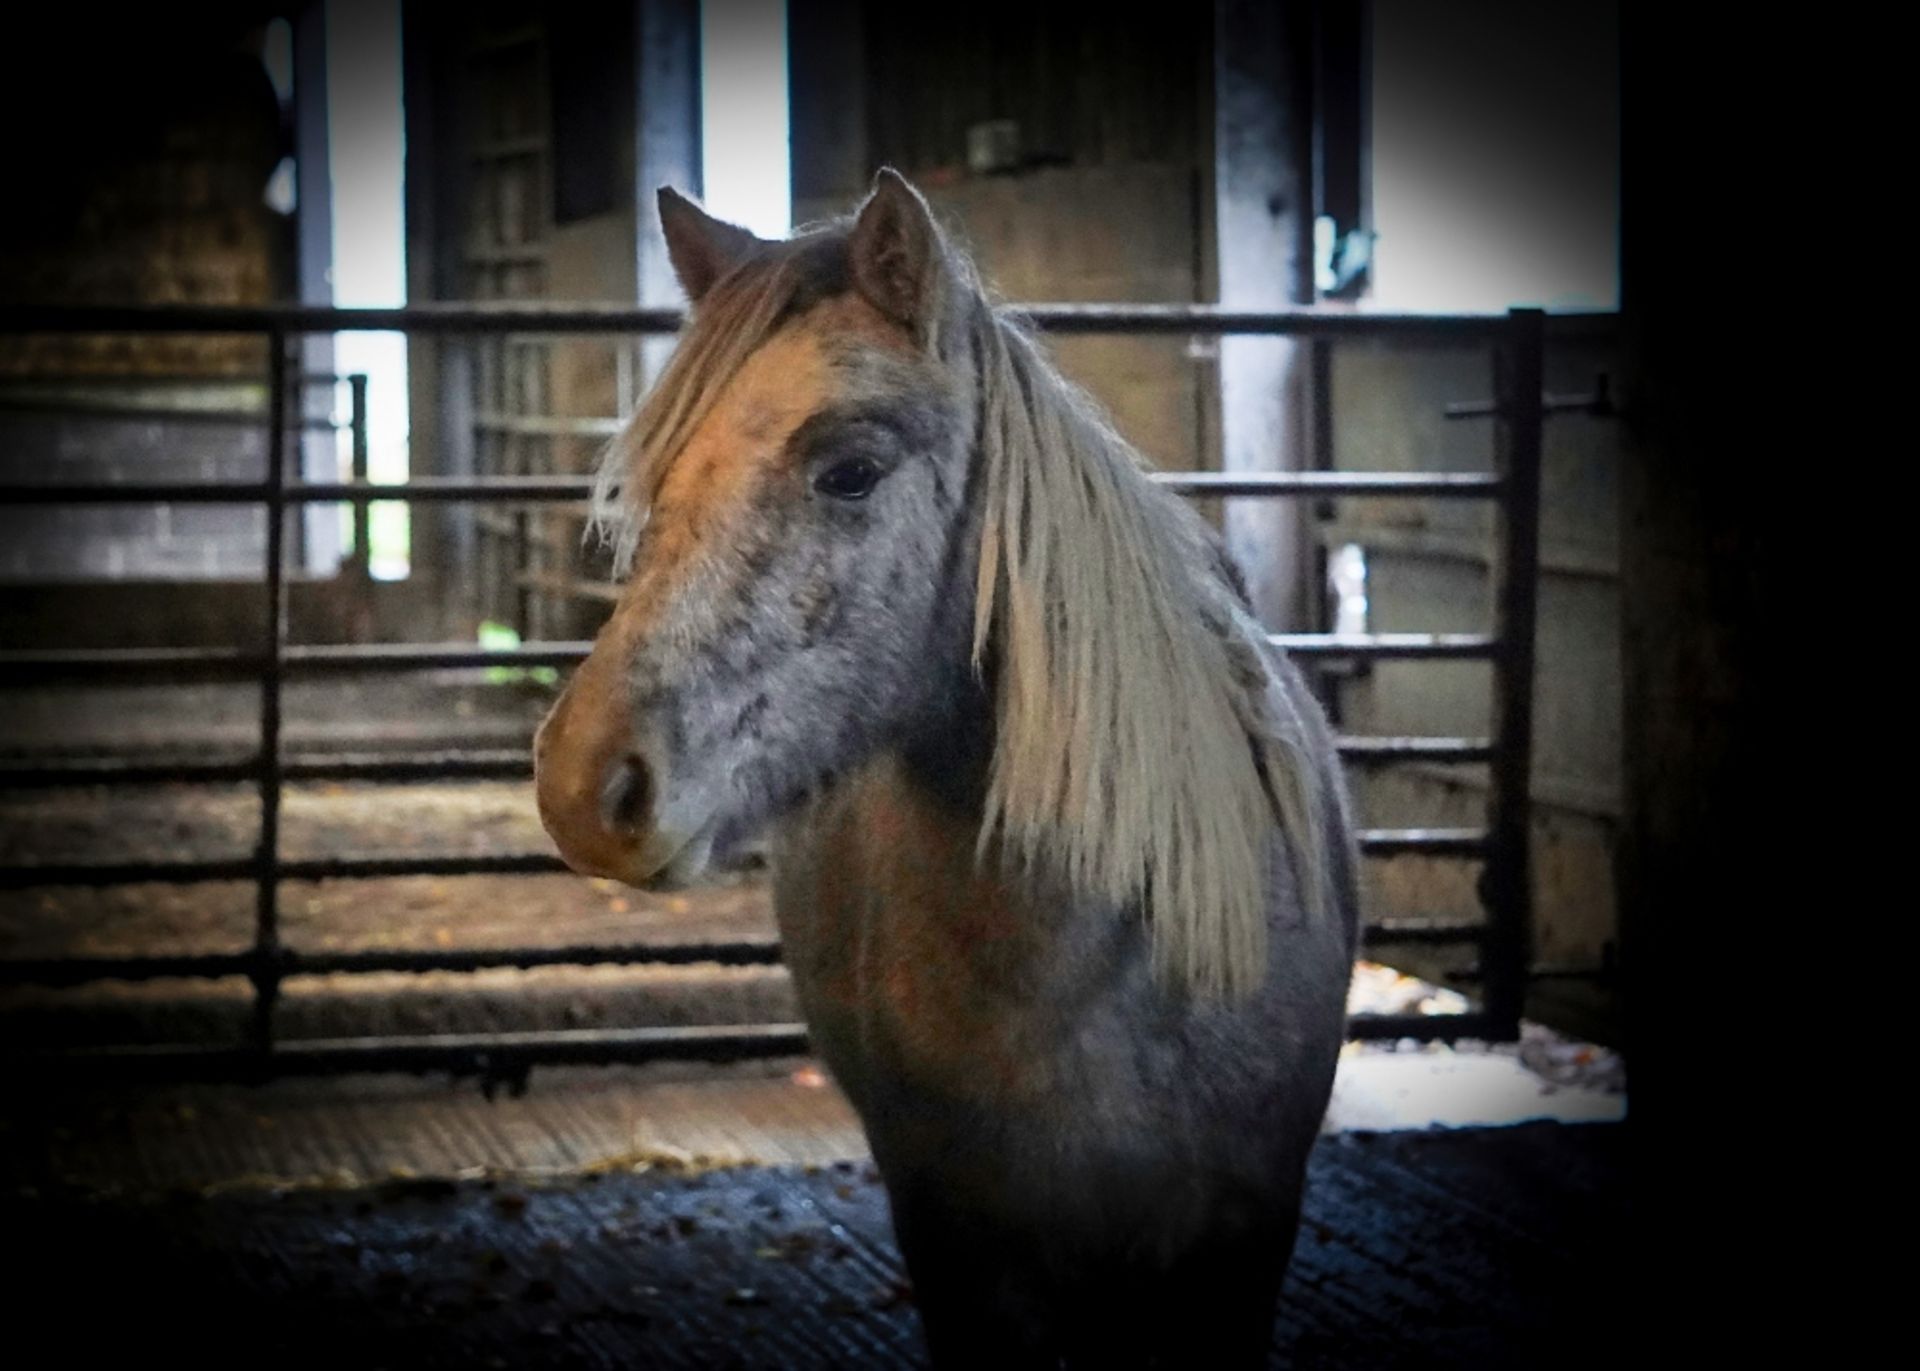 'GODSWORTHY' DARTMOOR HILL PONY GREY FILLY APPROX 18 MONTHS OLD - Image 4 of 10